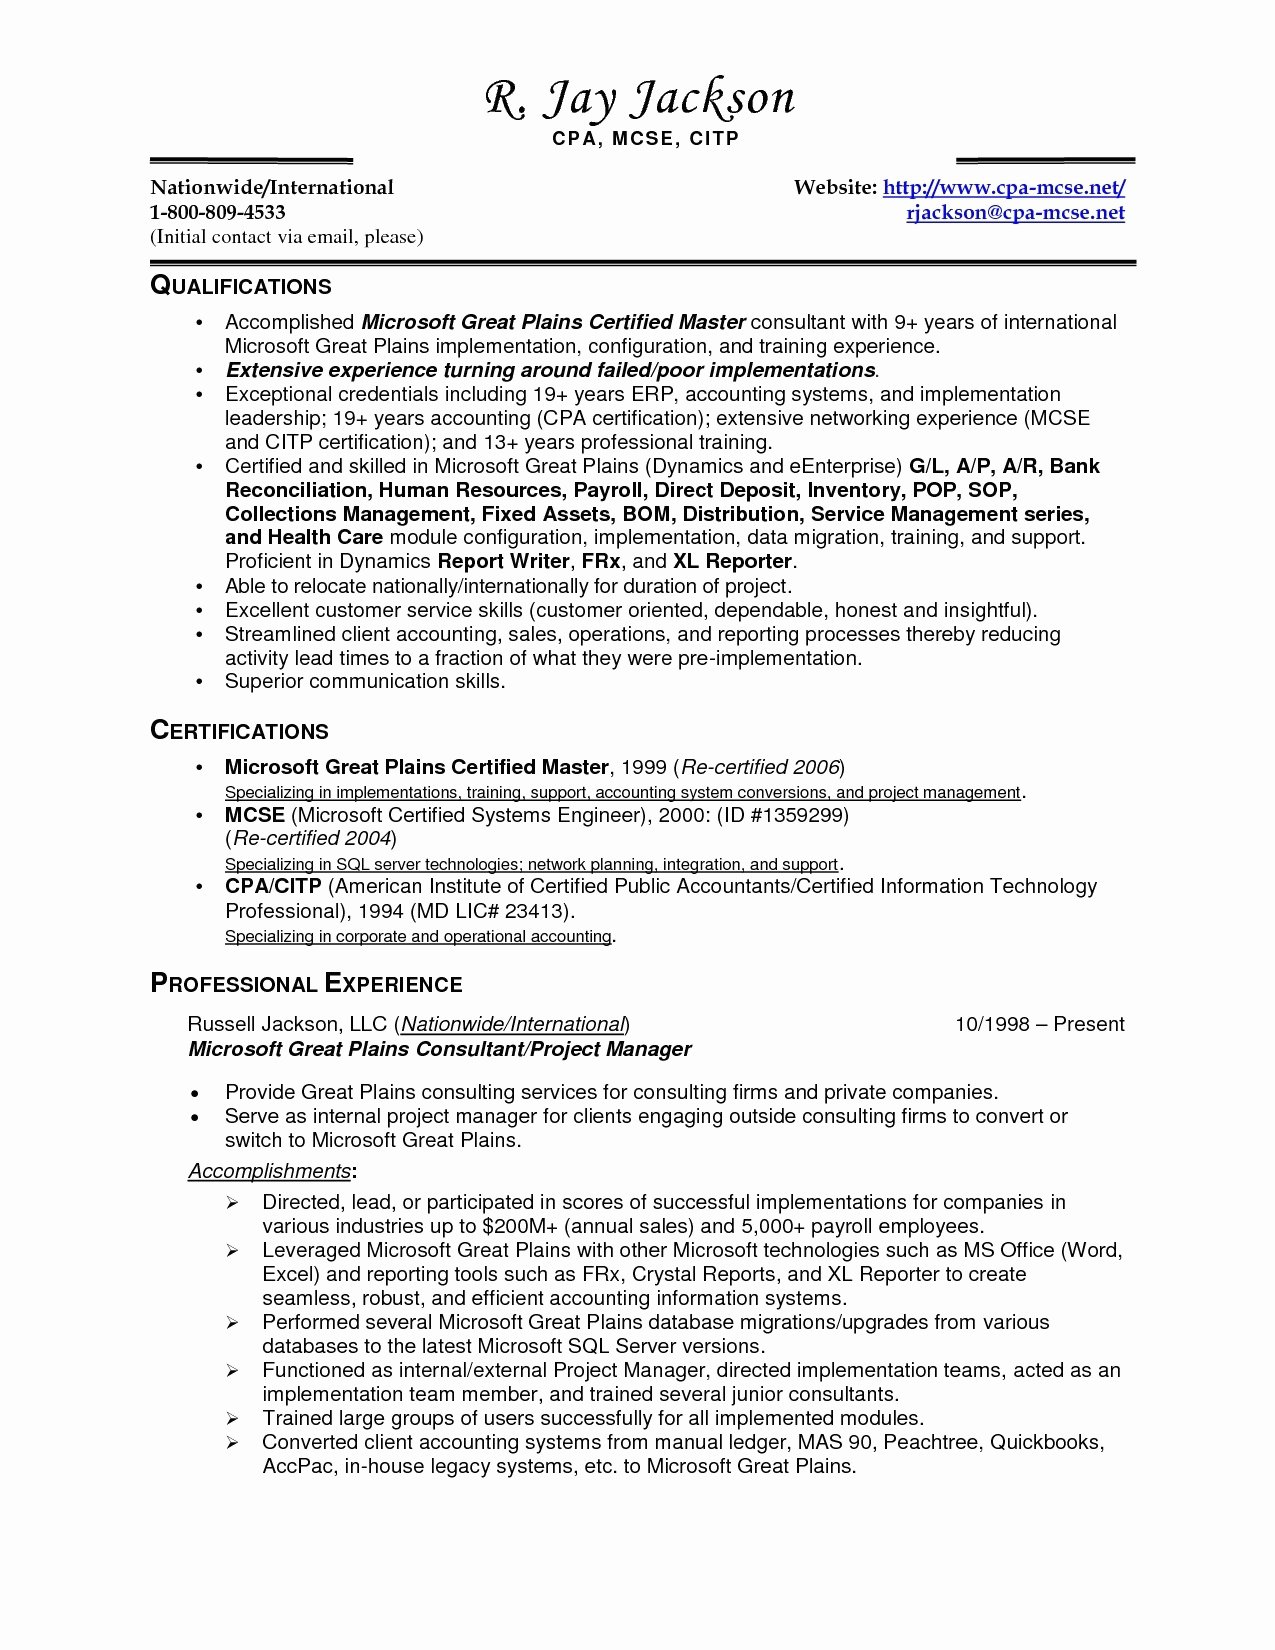 Staff Accounting Resume Samples Awesome Staff Accounting Resume Samples